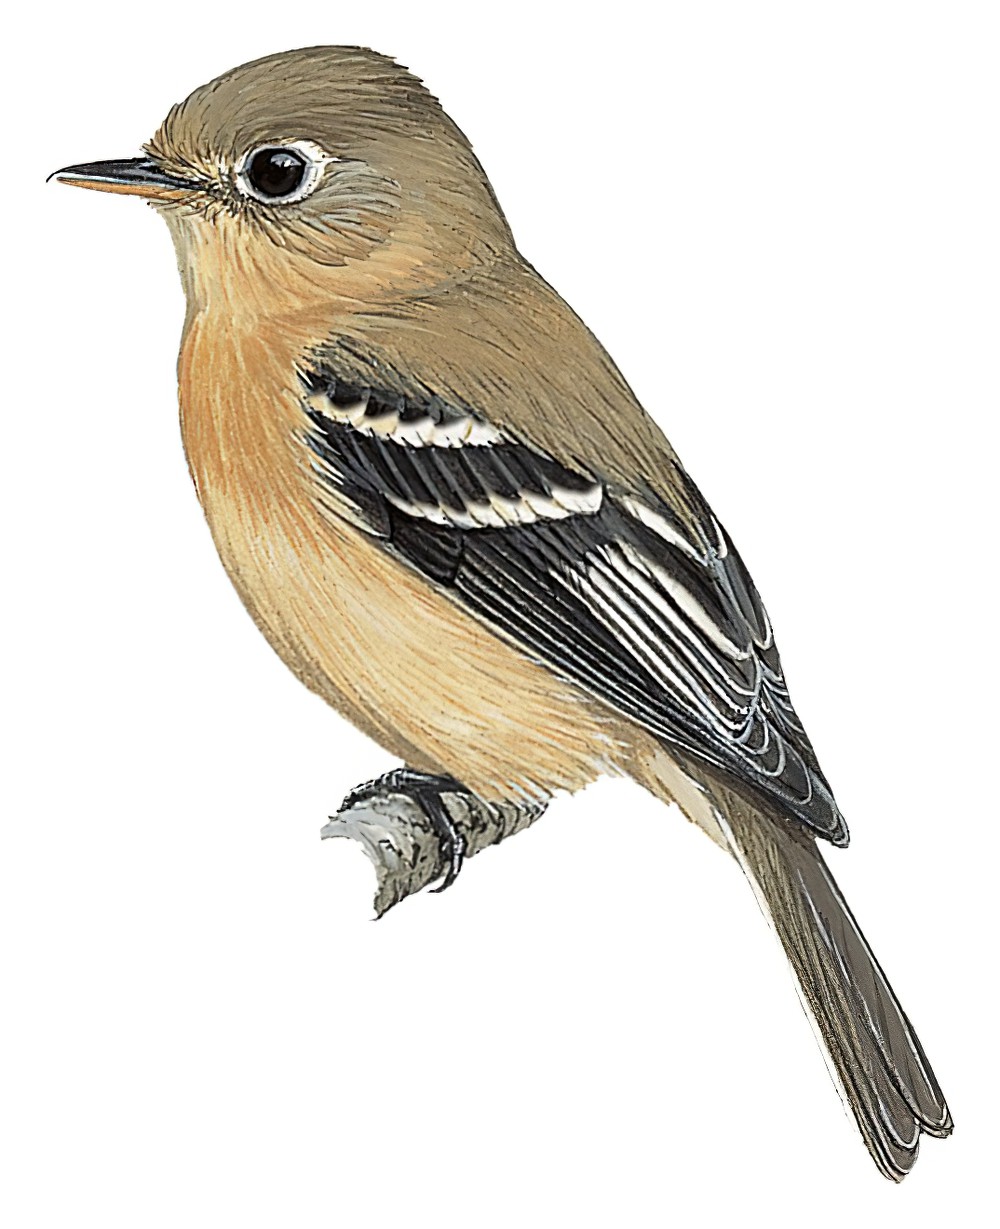 Buff-breasted Flycatcher / Empidonax fulvifrons